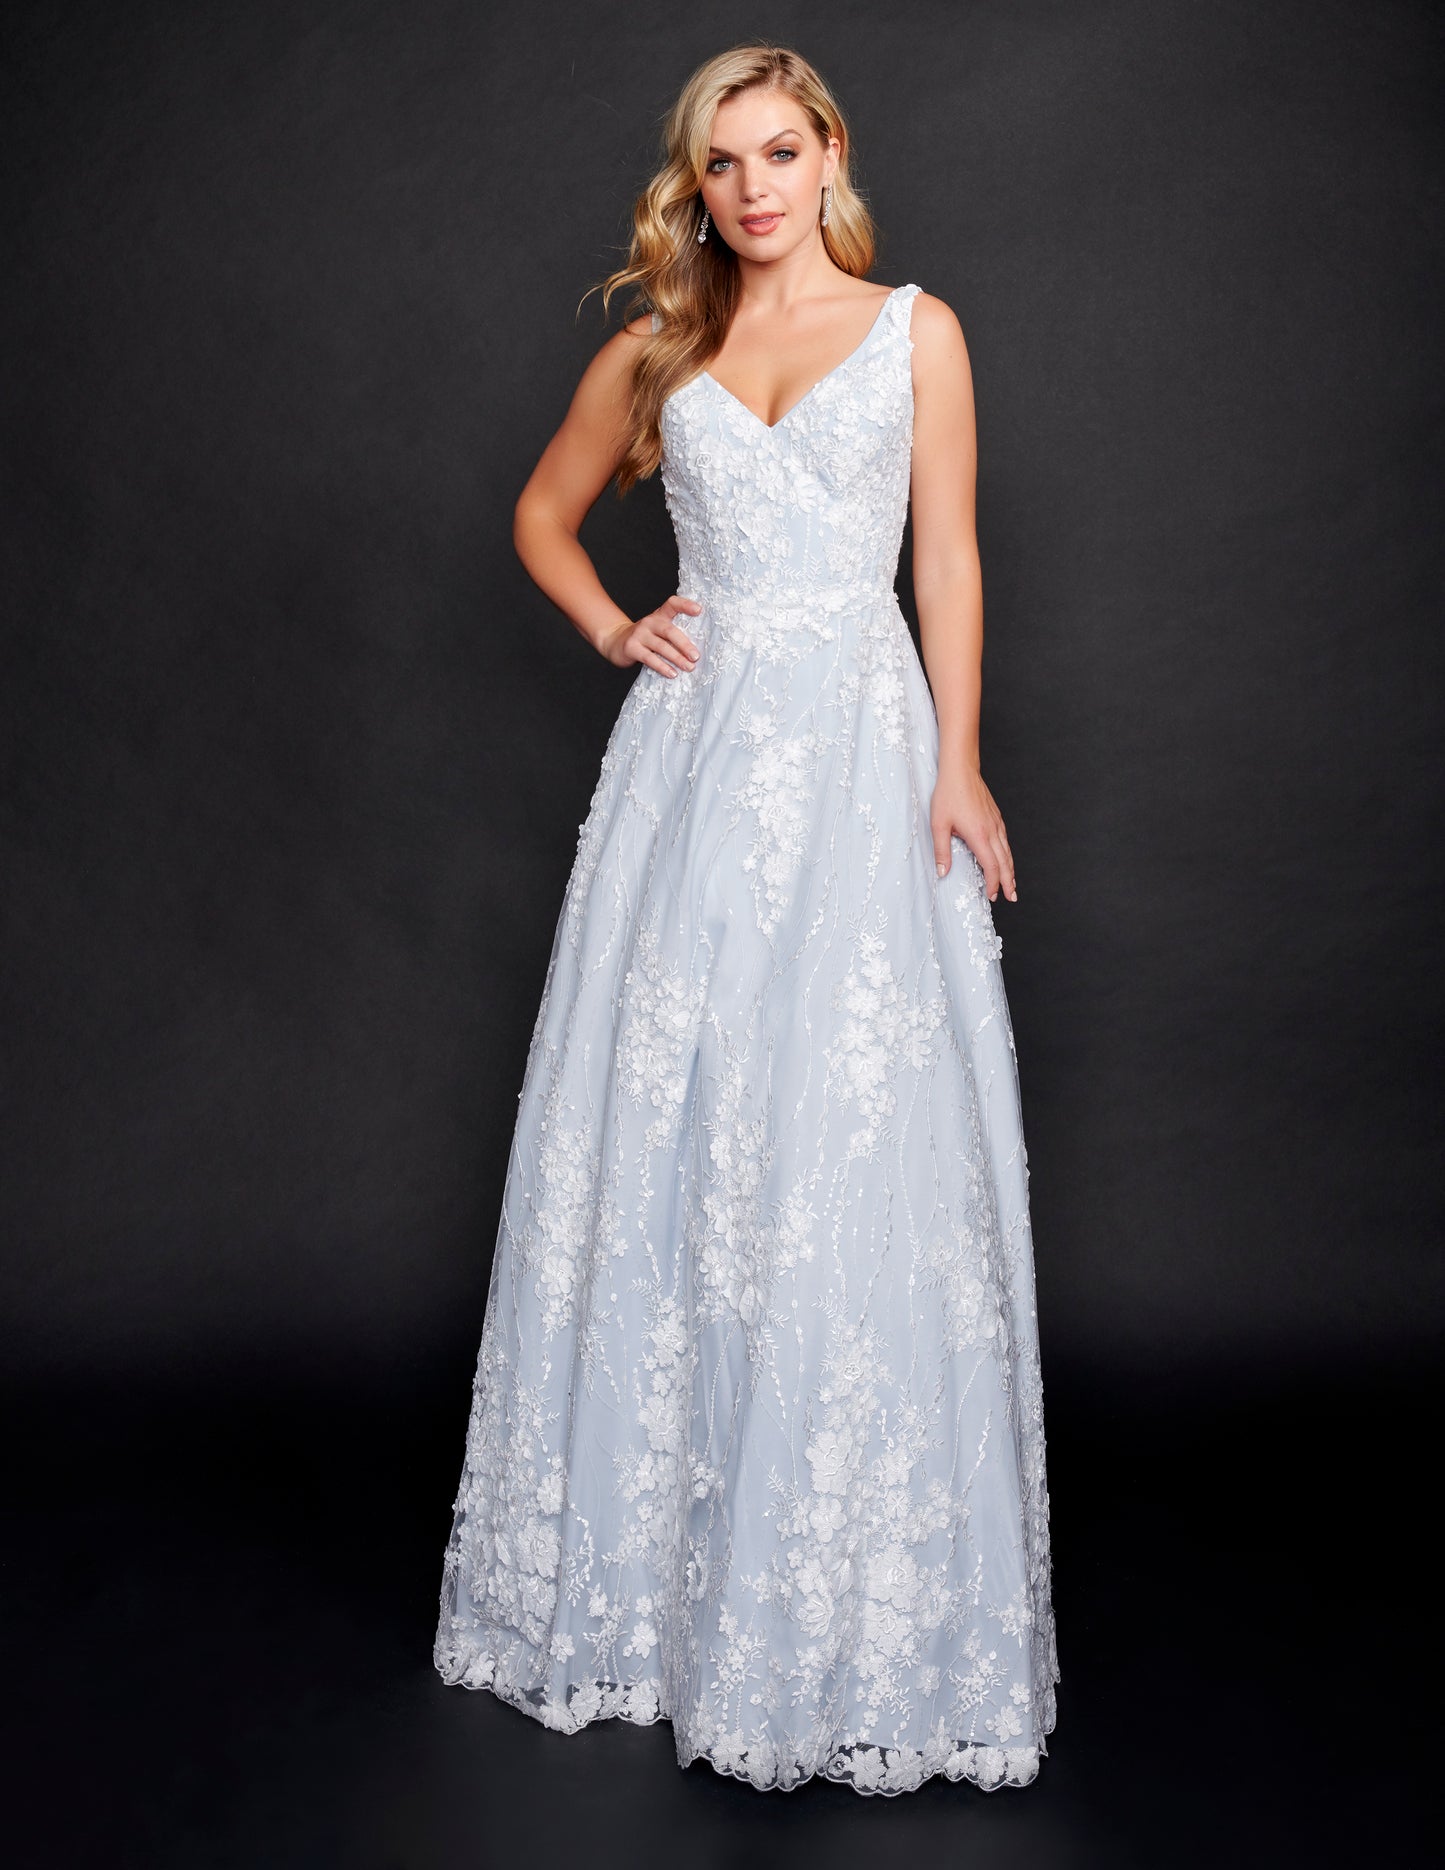 Nina Canacci 2348 Wedding Dress 3D Flowered Lace Ivory or Ivory Blue V neckline A Line Bridal Gown  Colors:  Ivory